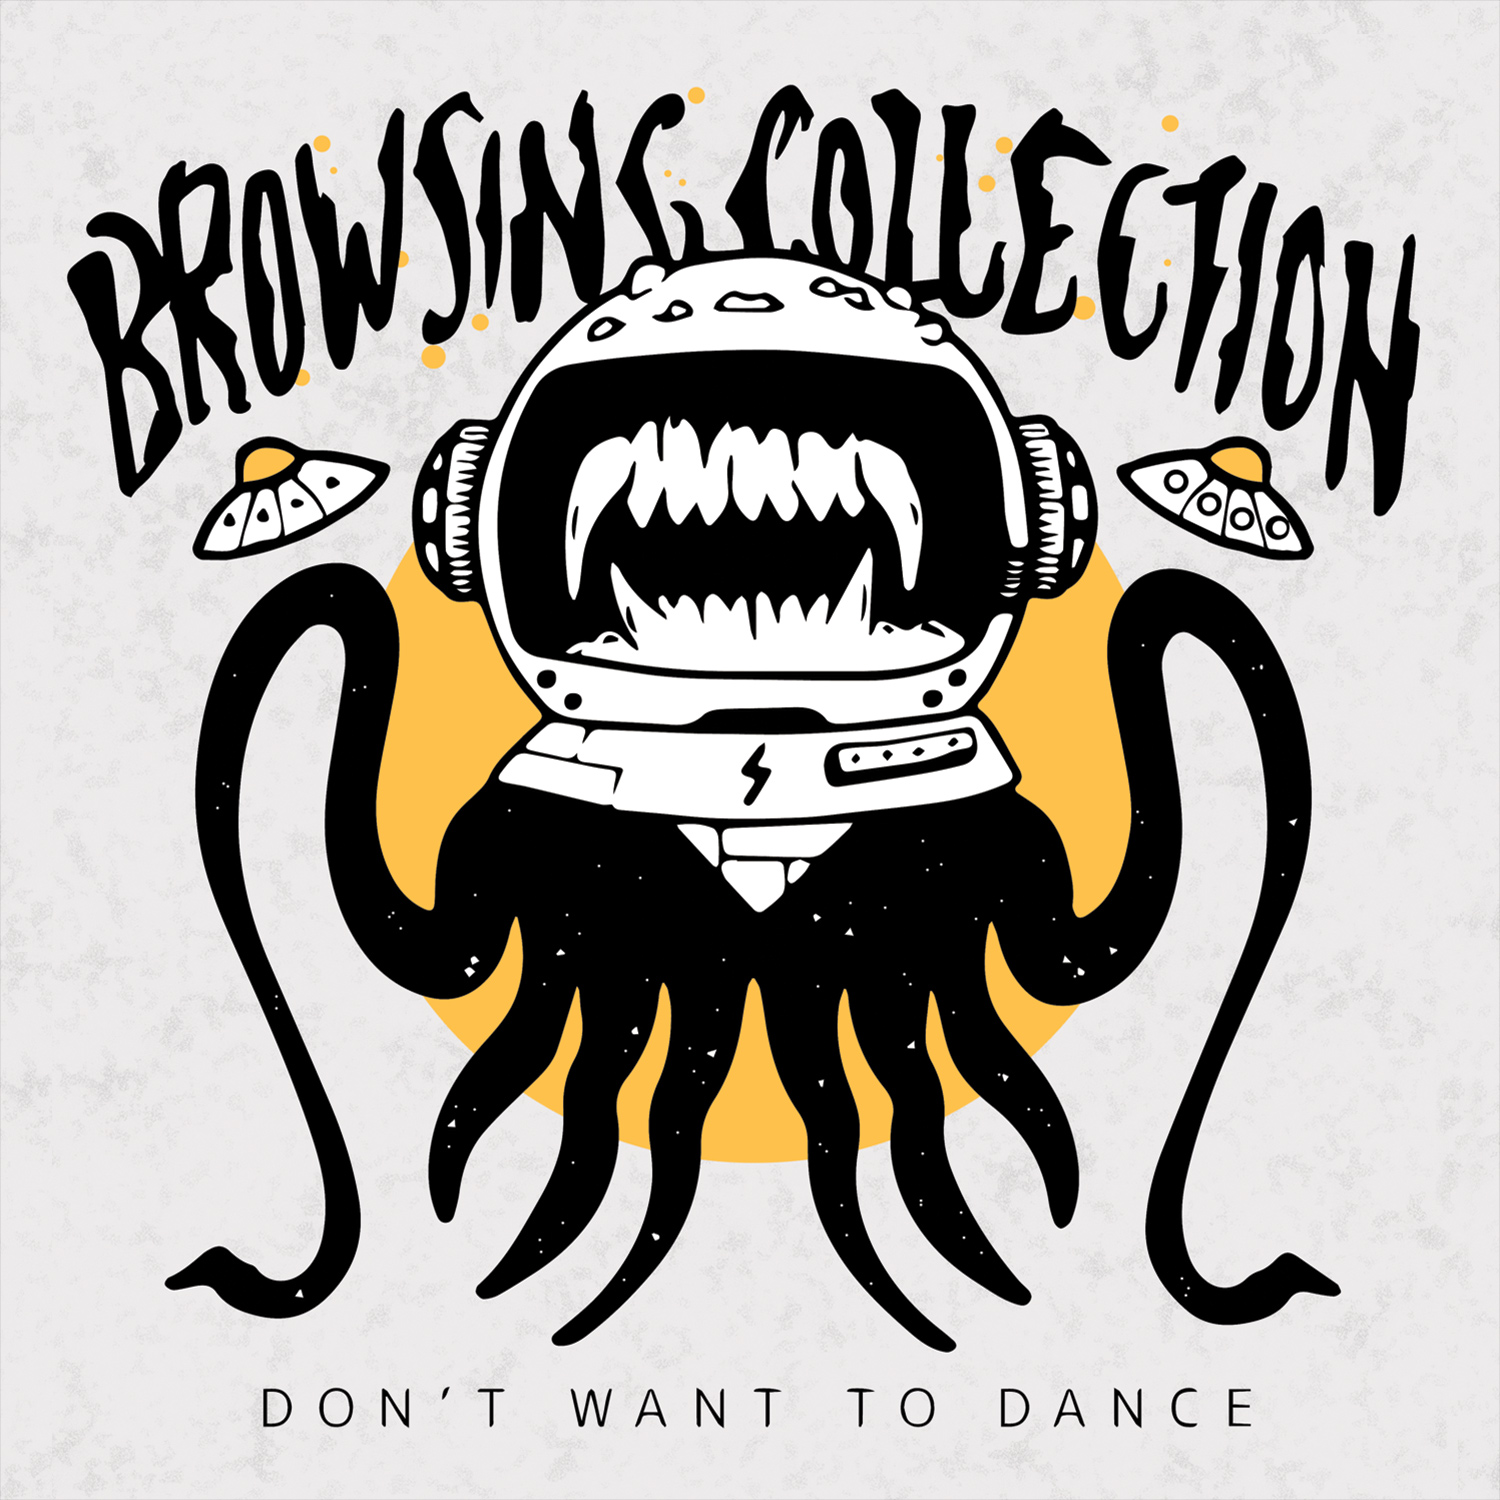 Browsing Collection Releases “Don’t Want to Dance”